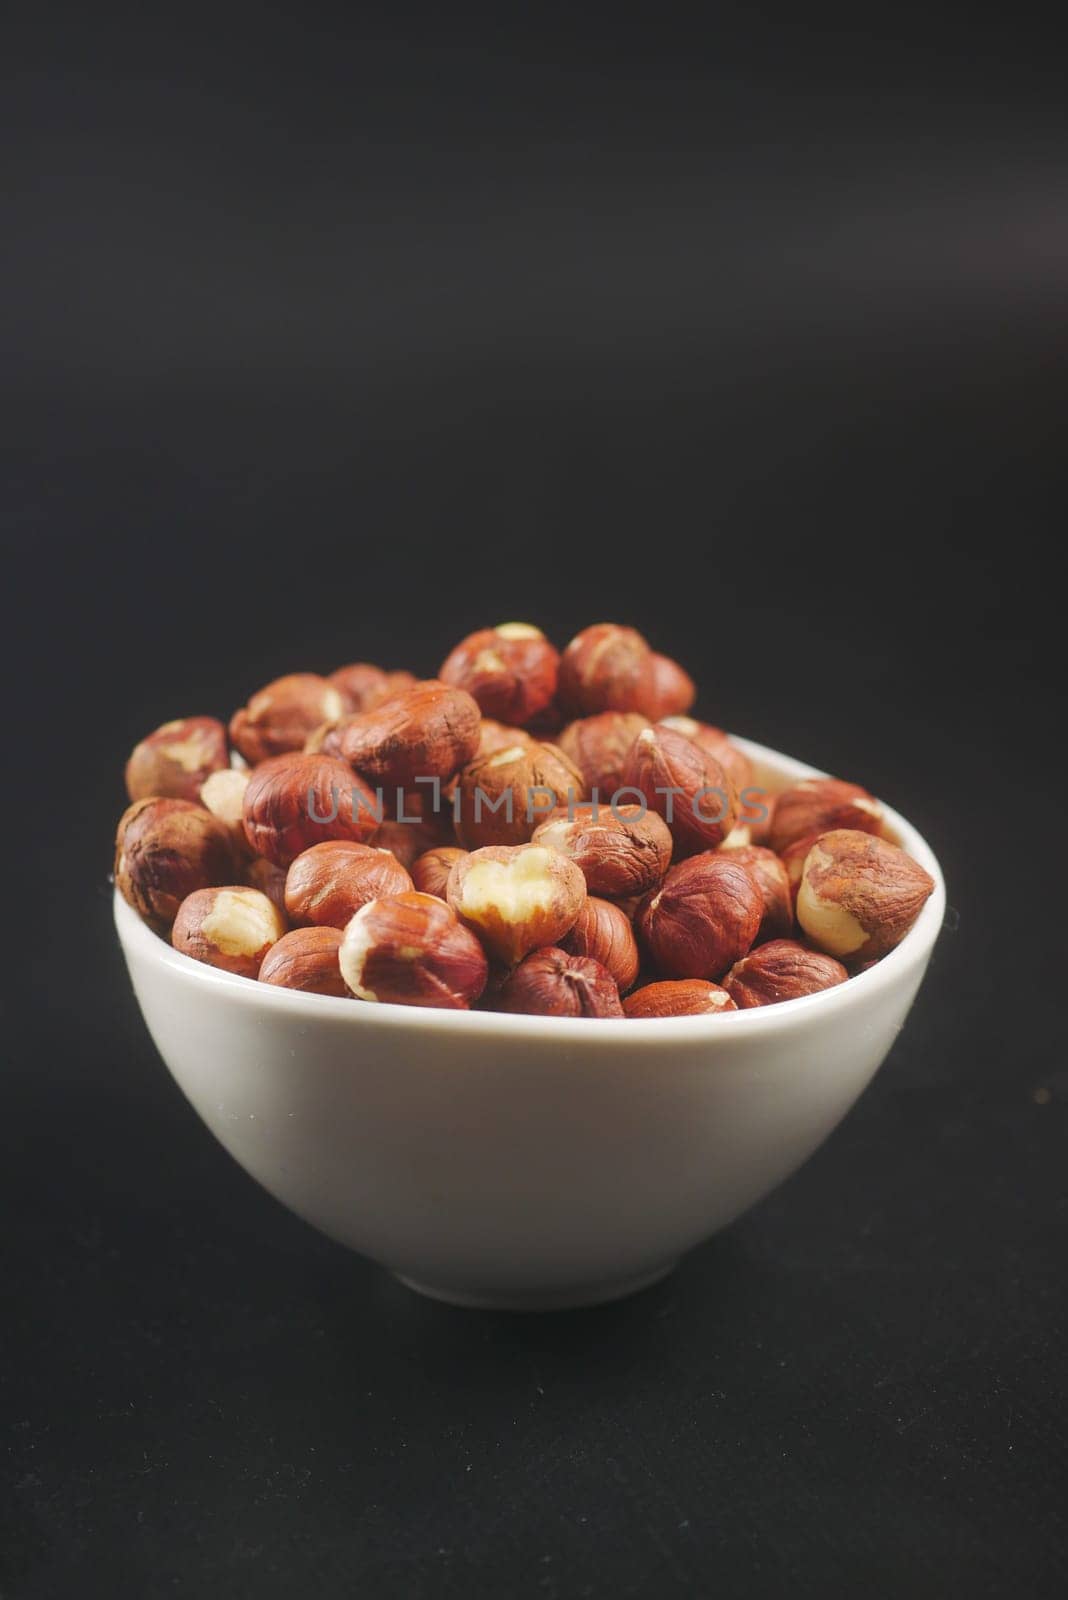 hazelnuts in a container on black background